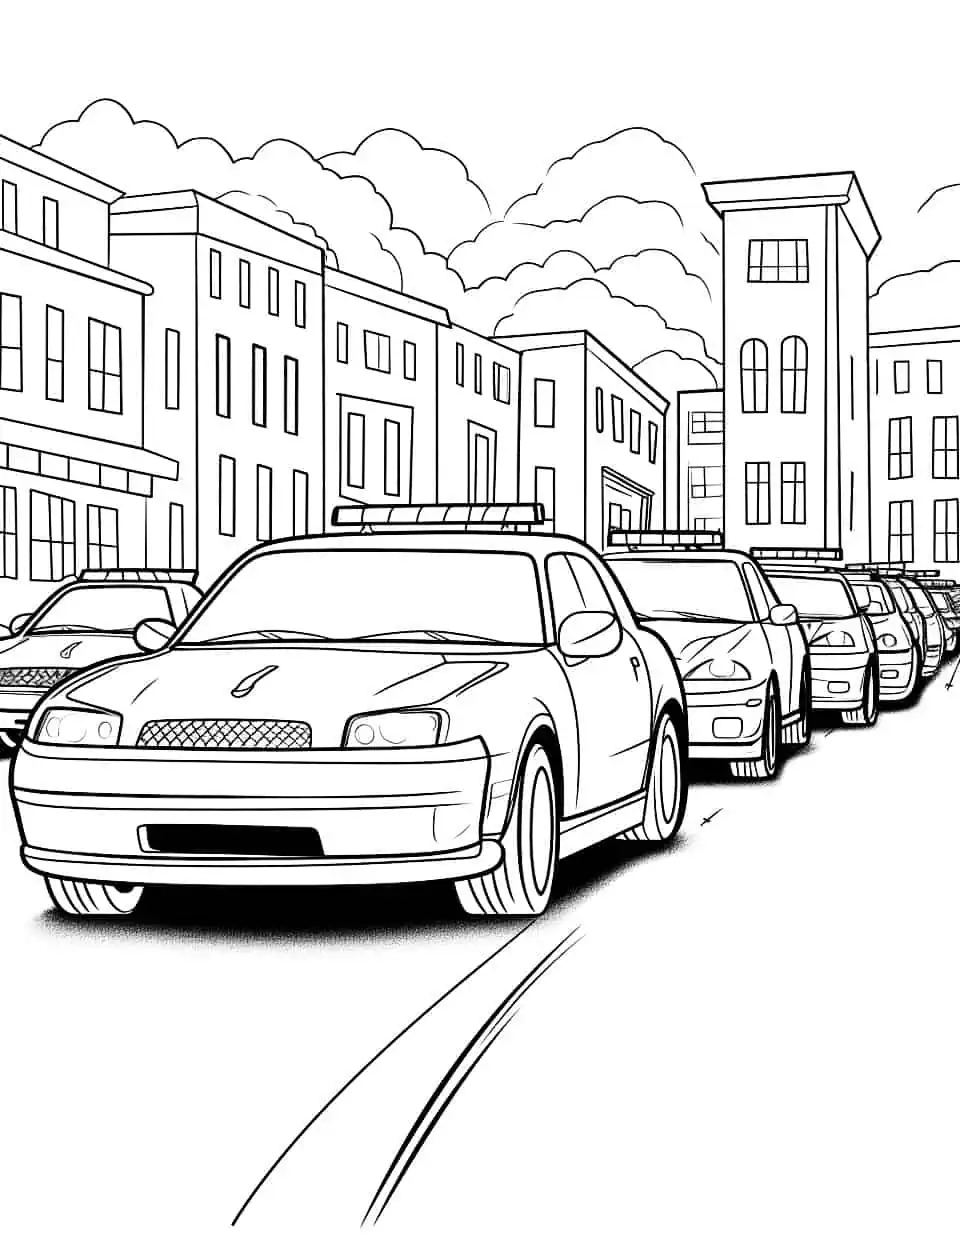 Police Car Parade Coloring Page - A line of police cars with lights flashing. Let the kids use their imaginations to make the scene come alive.